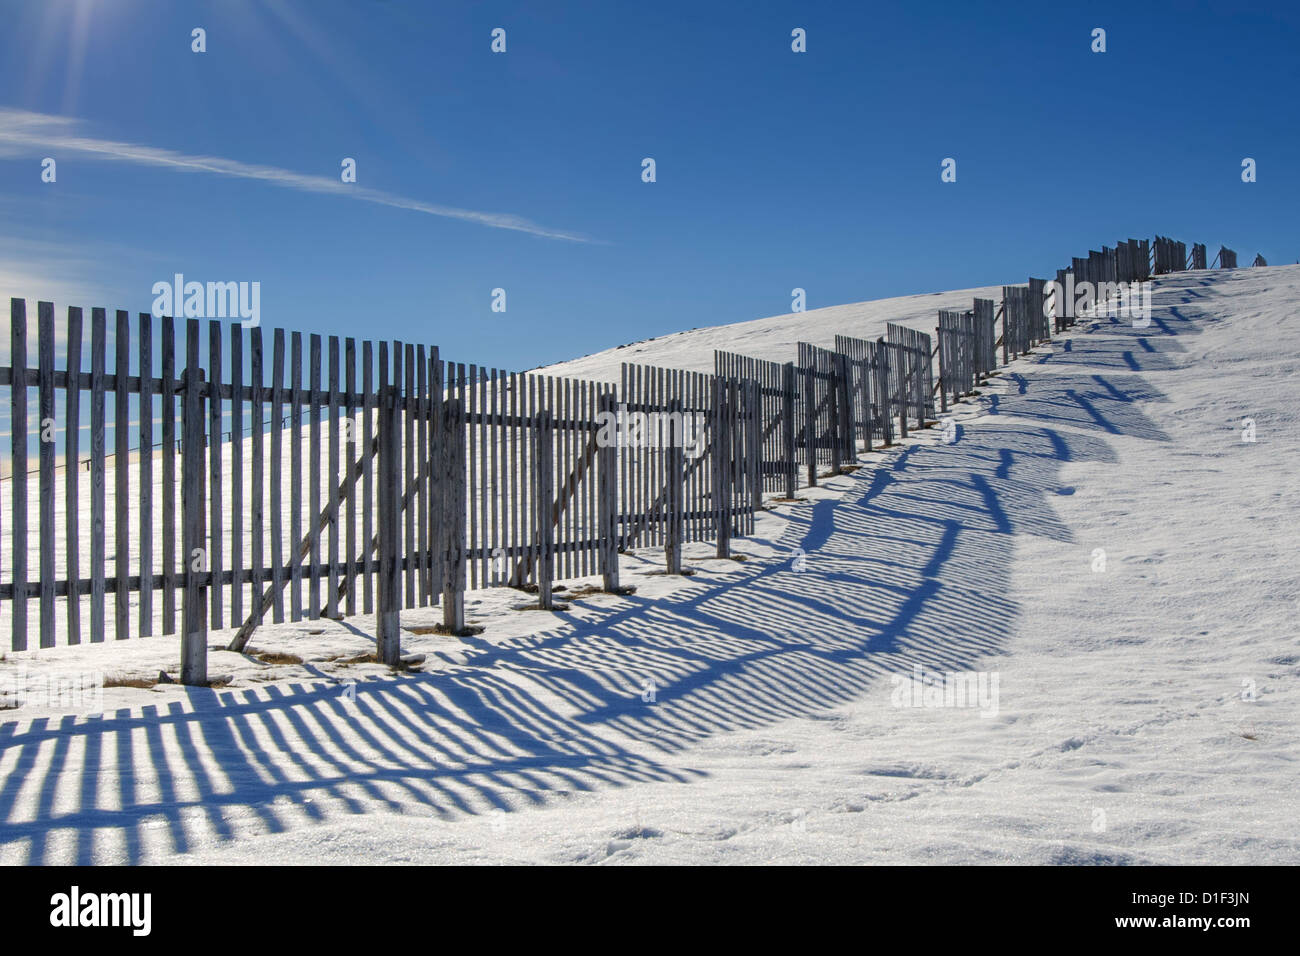 Fence as avalanche barrier, South Tyrol, Italy Stock Photo